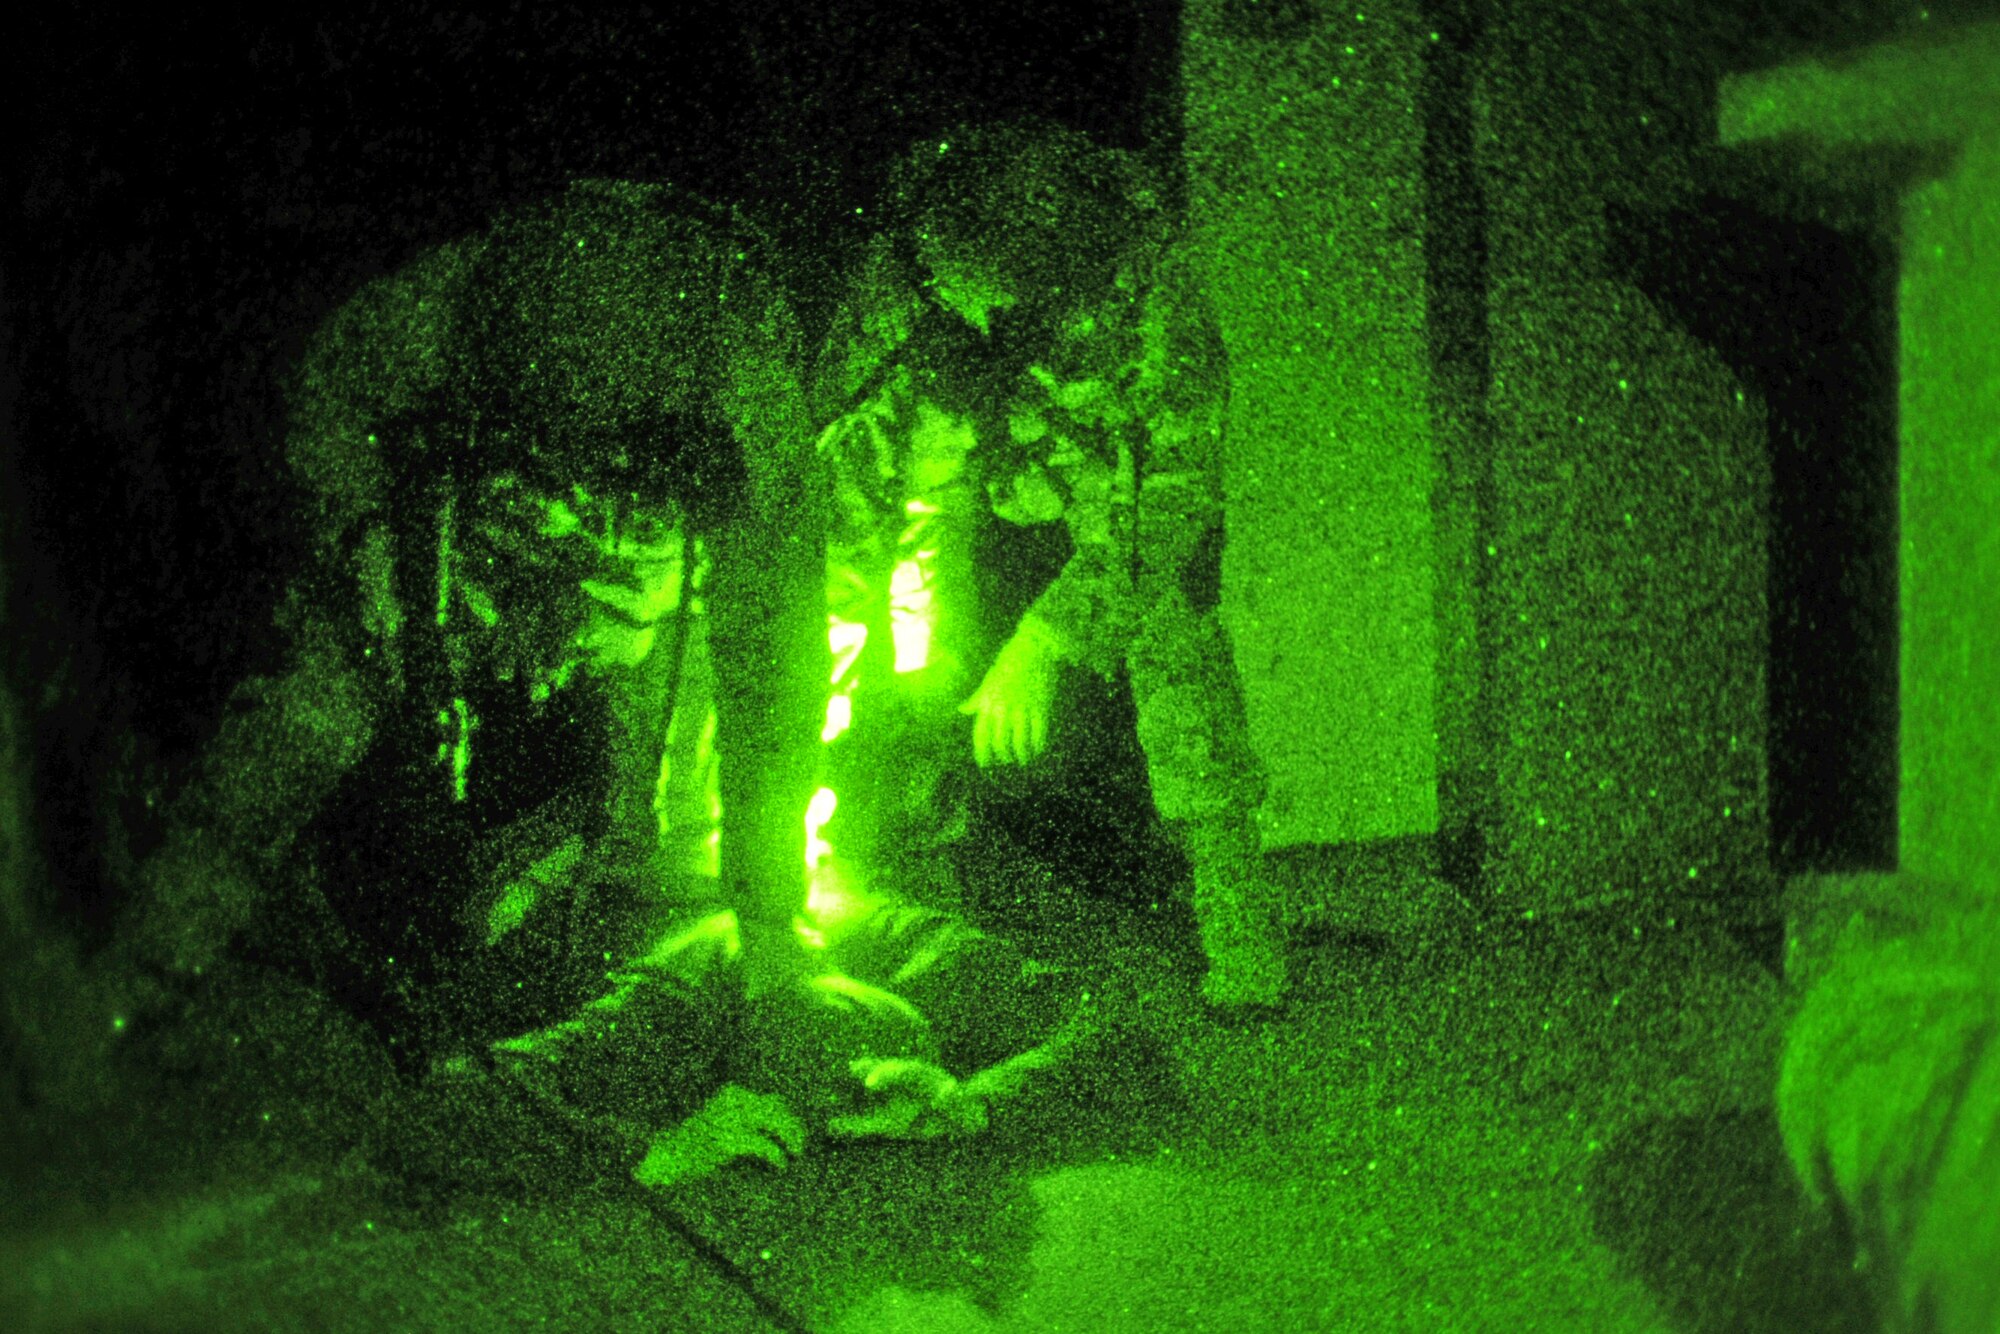 U.S. Air Force Senior Airman Seth Ewing and Tech. Sgt. Rebecca James, left to right, 352nd Special Operations Support Squadron Deployed Aircraft Ground Response Element, detain an individual Nov. 20, 2013, as part of a casualty evacuation exercise. The 67th Special Operations Squadron and 352nd SOSS participated in the exercise together, which tested Airmen on their ability to care for and transport wounded service members under tactical conditions similar to what would be encountered in a combat environment. (U.S. Air Force photo by Senior Airman Christine Griffiths/Released)